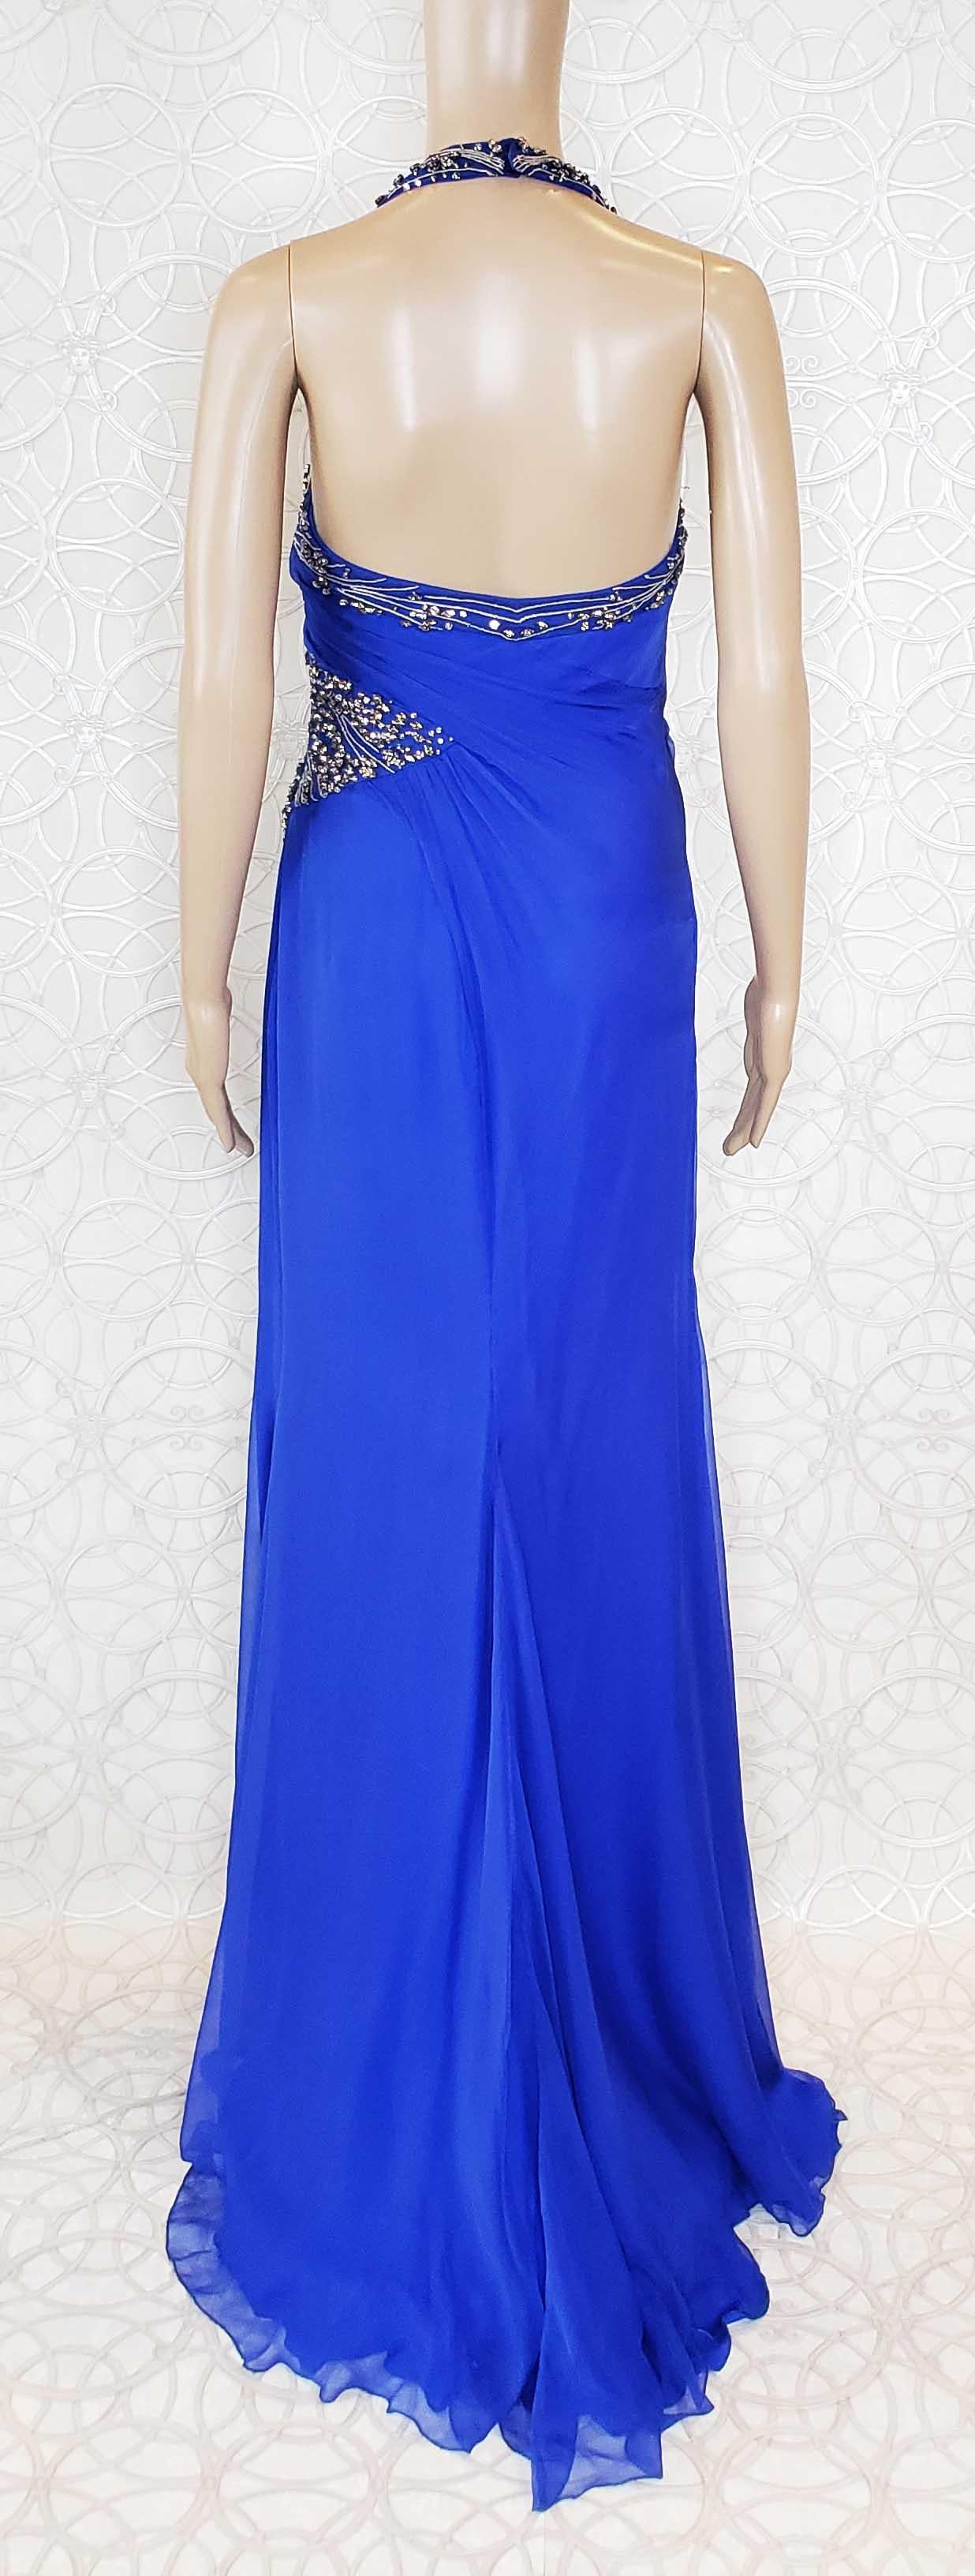 F/W 2009 NEW VERSACE BLUE SILK EMBROIDERED HALTER Gown 42 - 6 For Sale 3